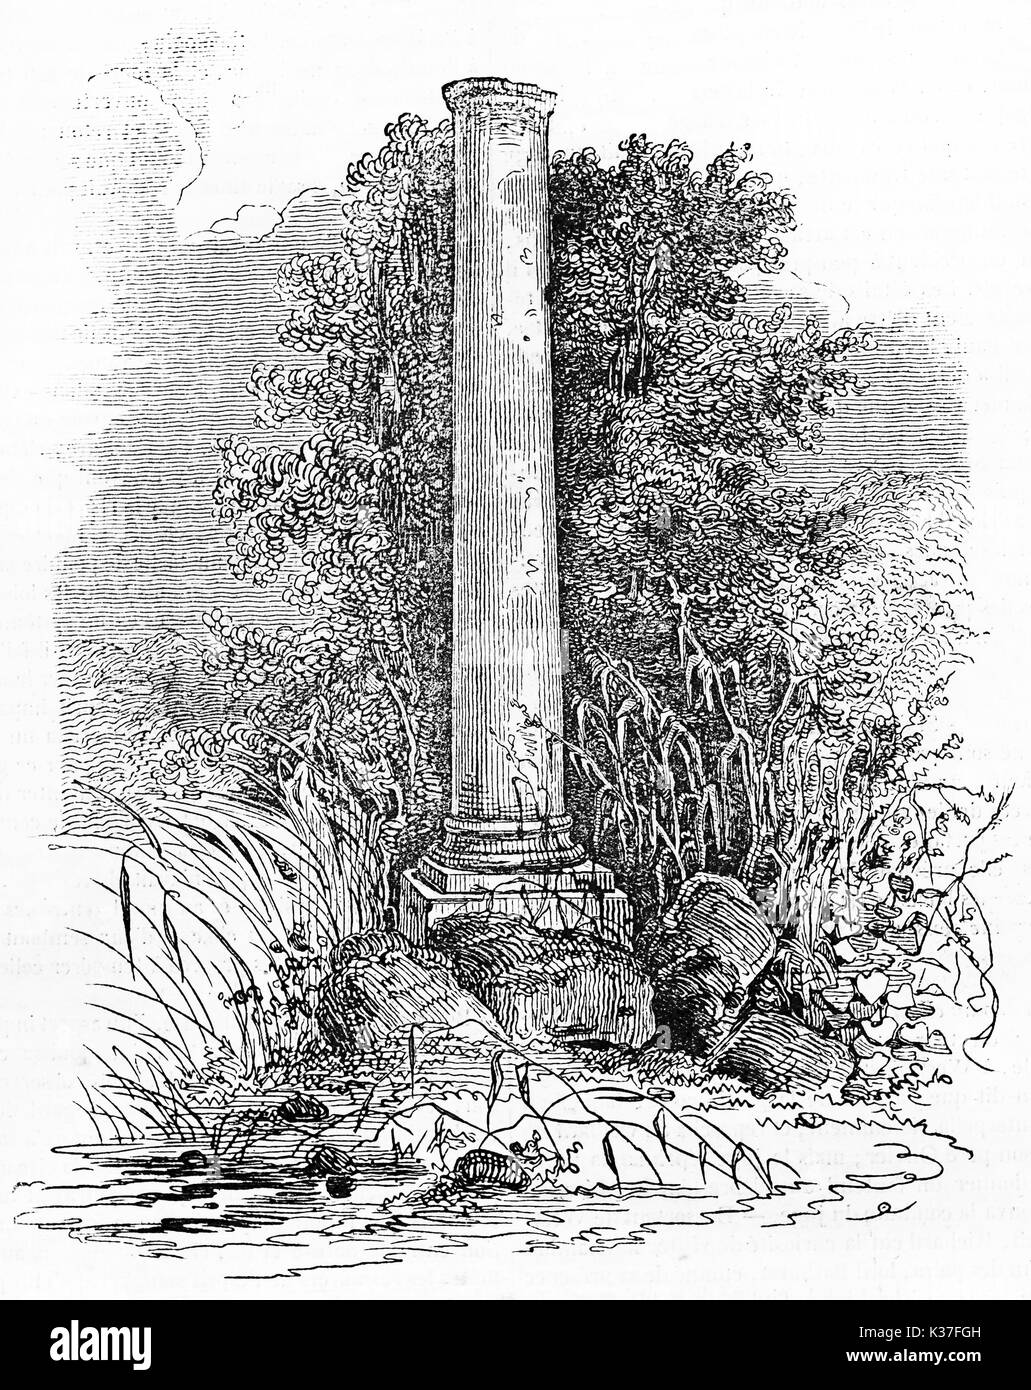 Ancient stone column surrounded by vegetation and weeds, funerary monument of Daubenton in Jardin des Plantes Paris. Old Illustration by Chevalier published on Magasin Pittoresque Paris 1834 Stock Photo